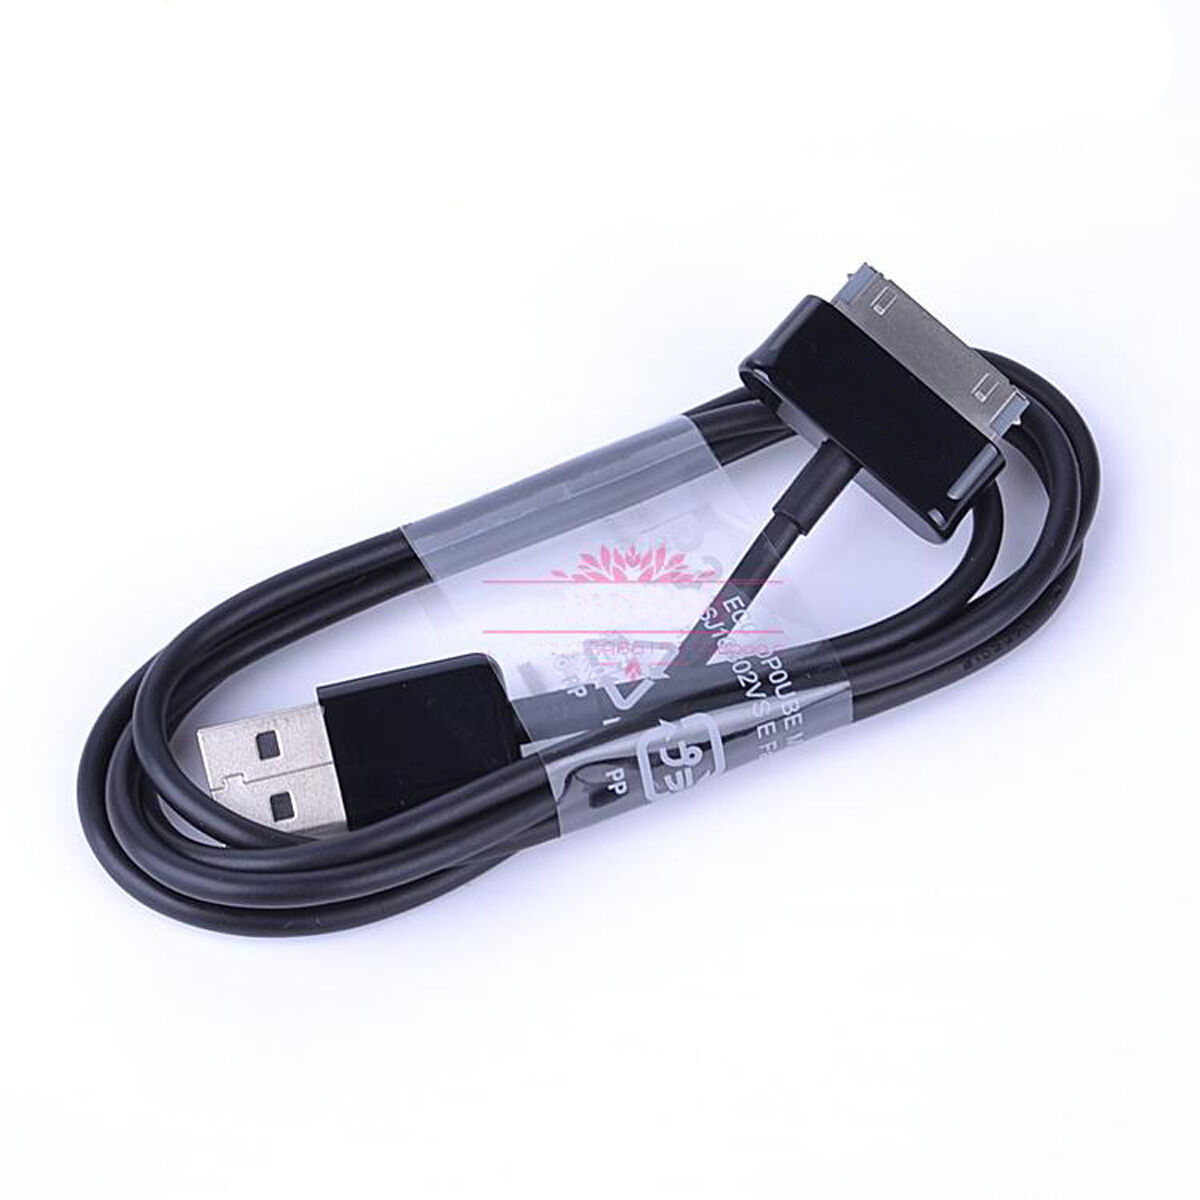 Primary image for USB Data Sync Charger Cable For Samsung Galaxy Tab 2 10.1 P5100 P5113